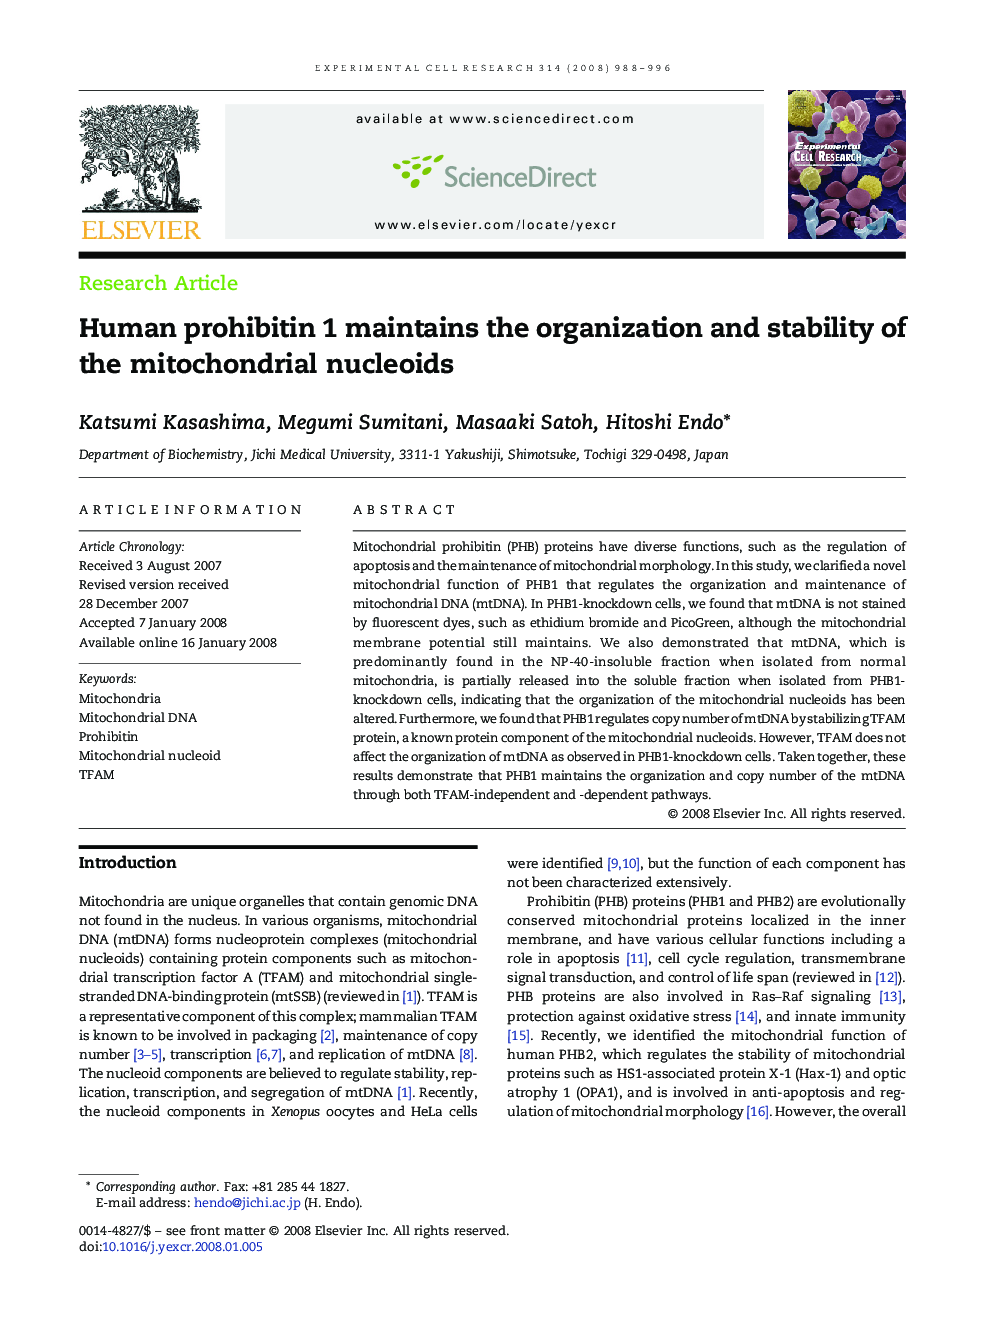 Human prohibitin 1 maintains the organization and stability of the mitochondrial nucleoids